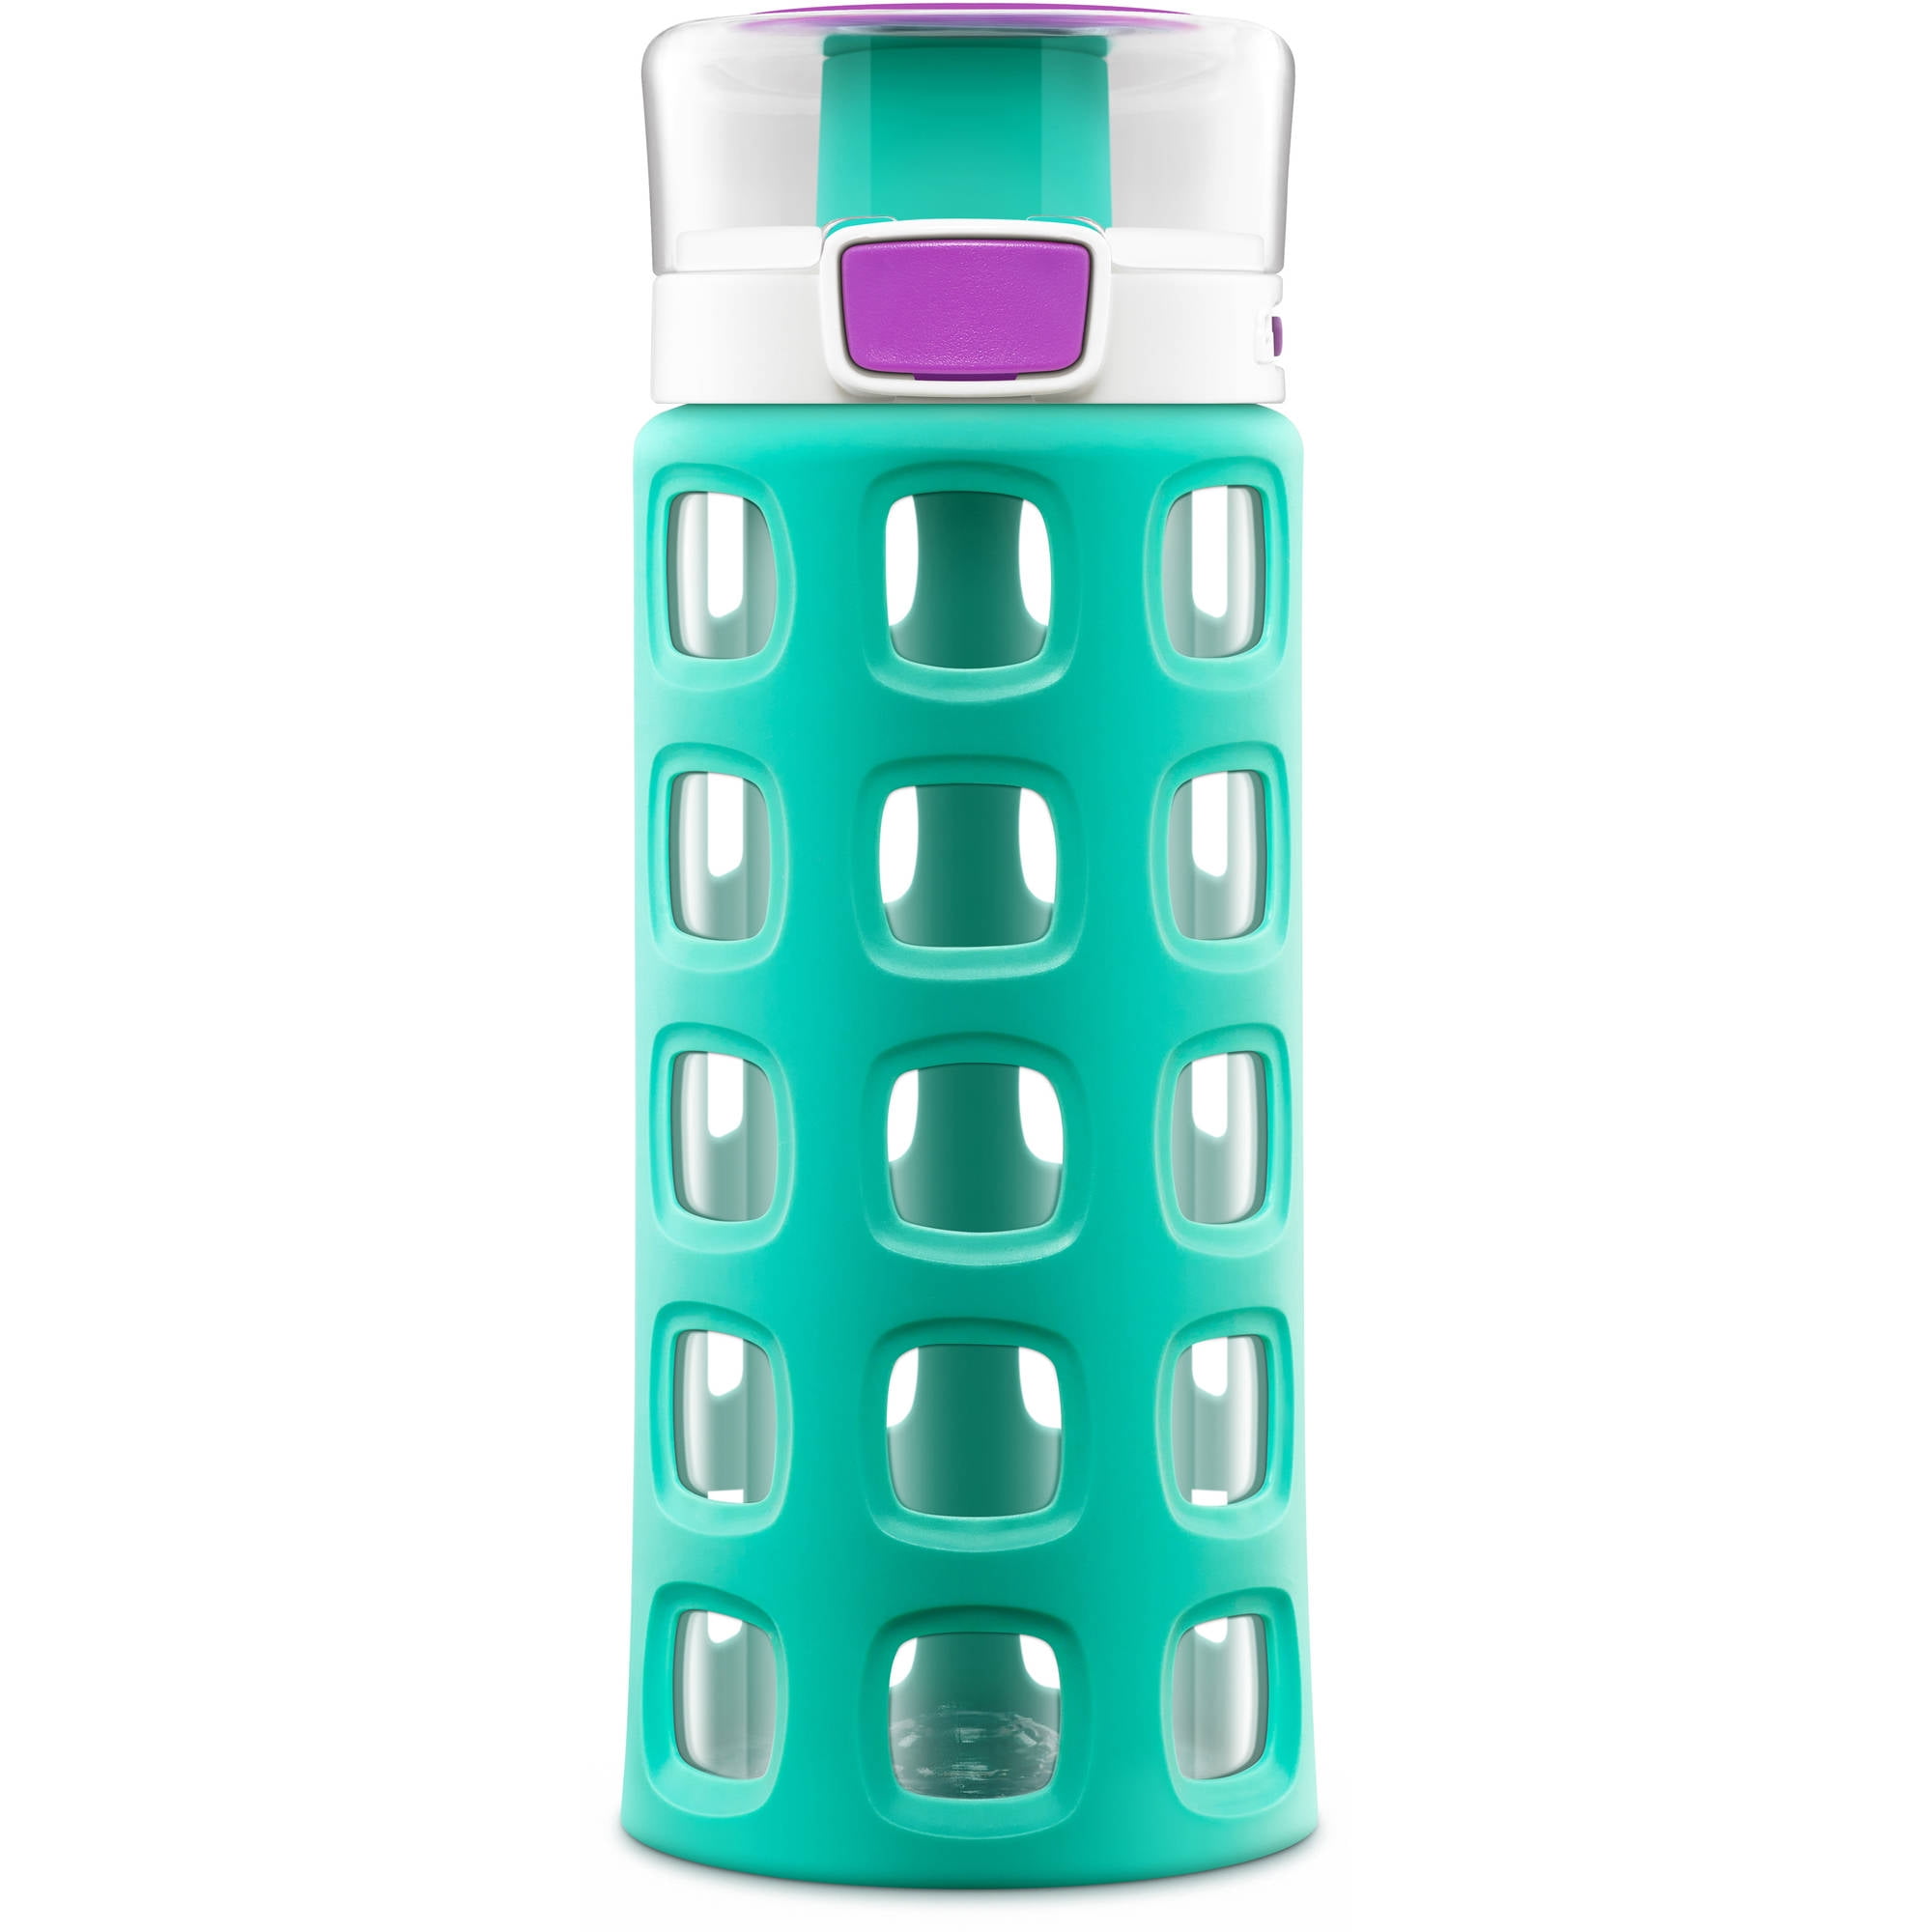 Ello 16 oz Green and Purple Plastic Water Bottle with Wide Mouth